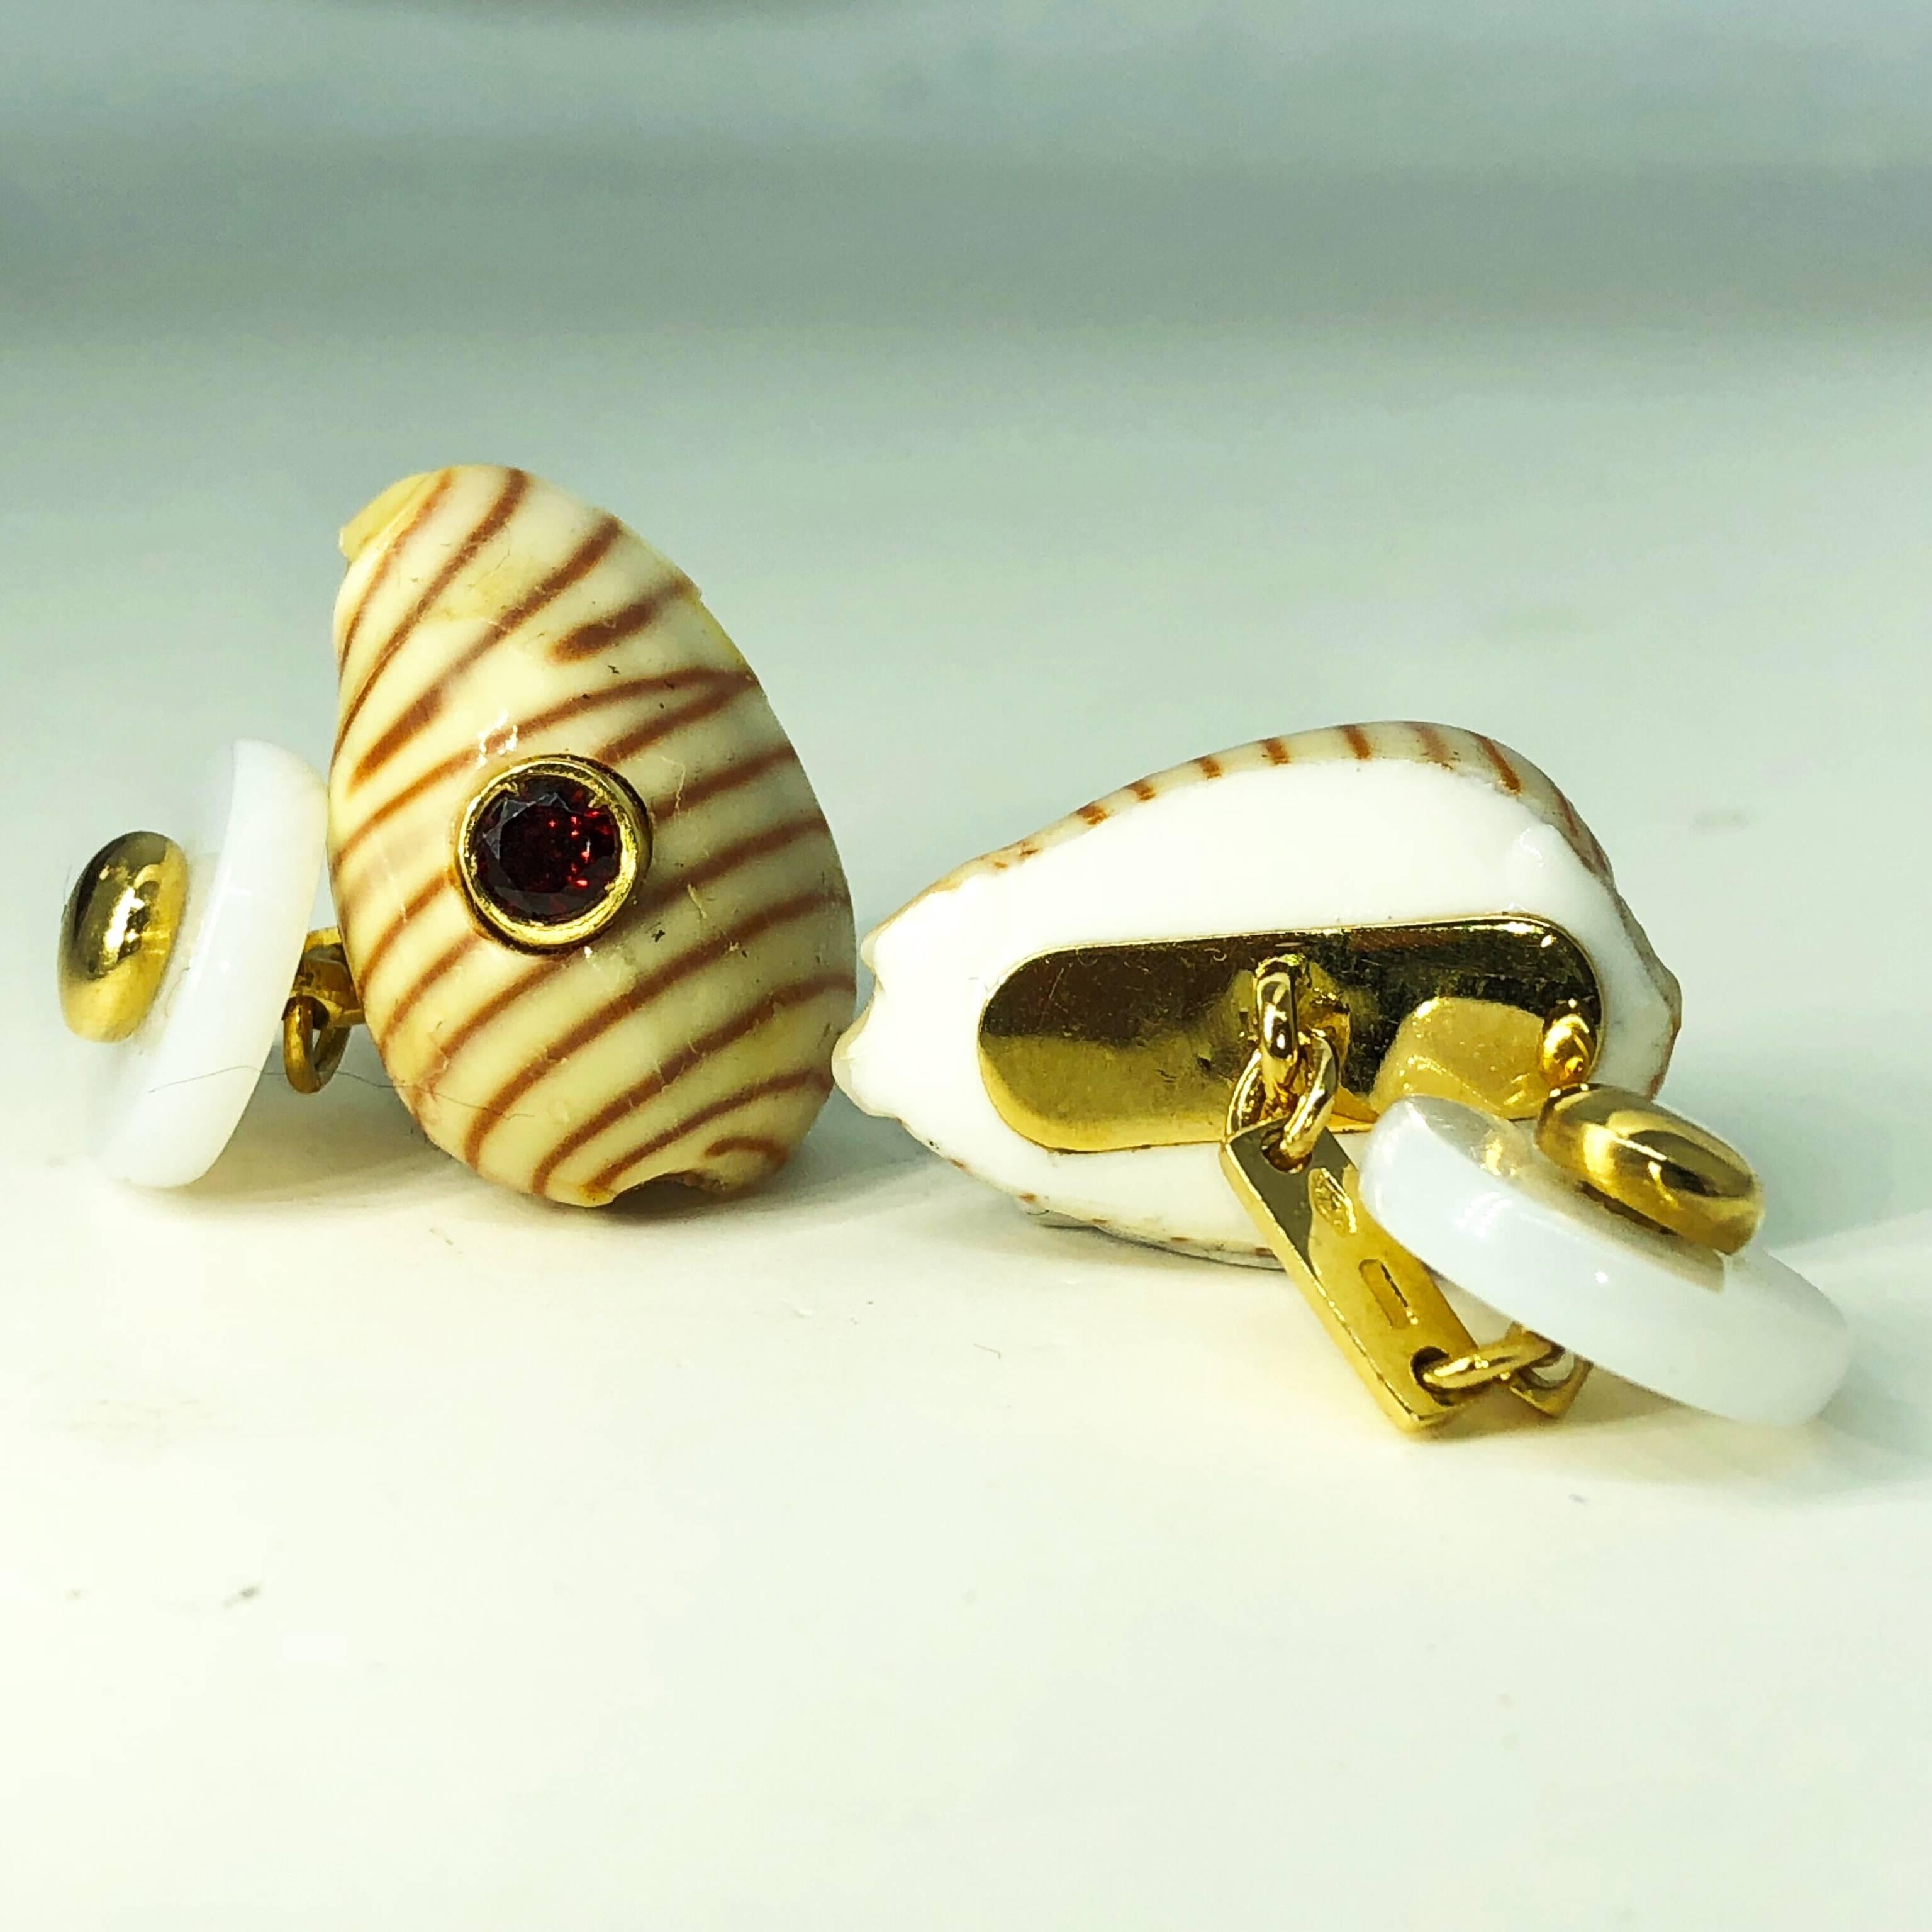 Unique pair of cufflinks combining a beige and carnelian red stripes seashell shaped with the magic vivid red of spessartine and a chic hand inlaid white agate disk back, 18Kt yellow gold setting.
In our smart tobacco suede leather box and Pouch.